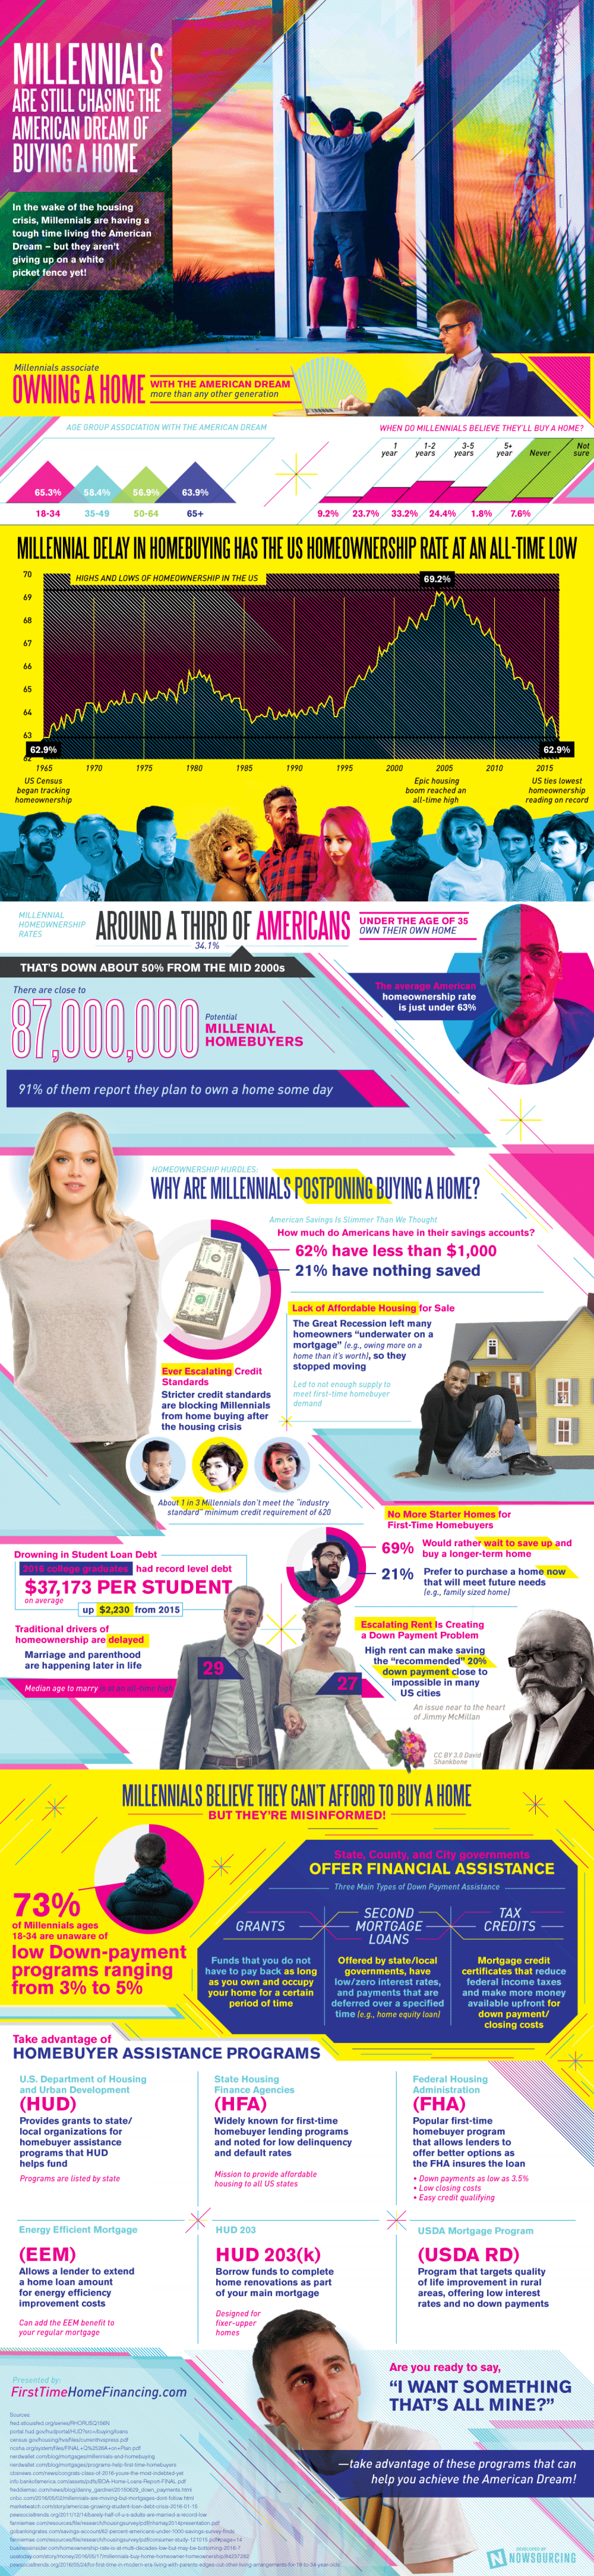 Millennials Want To Buy Homes, Too Infographic